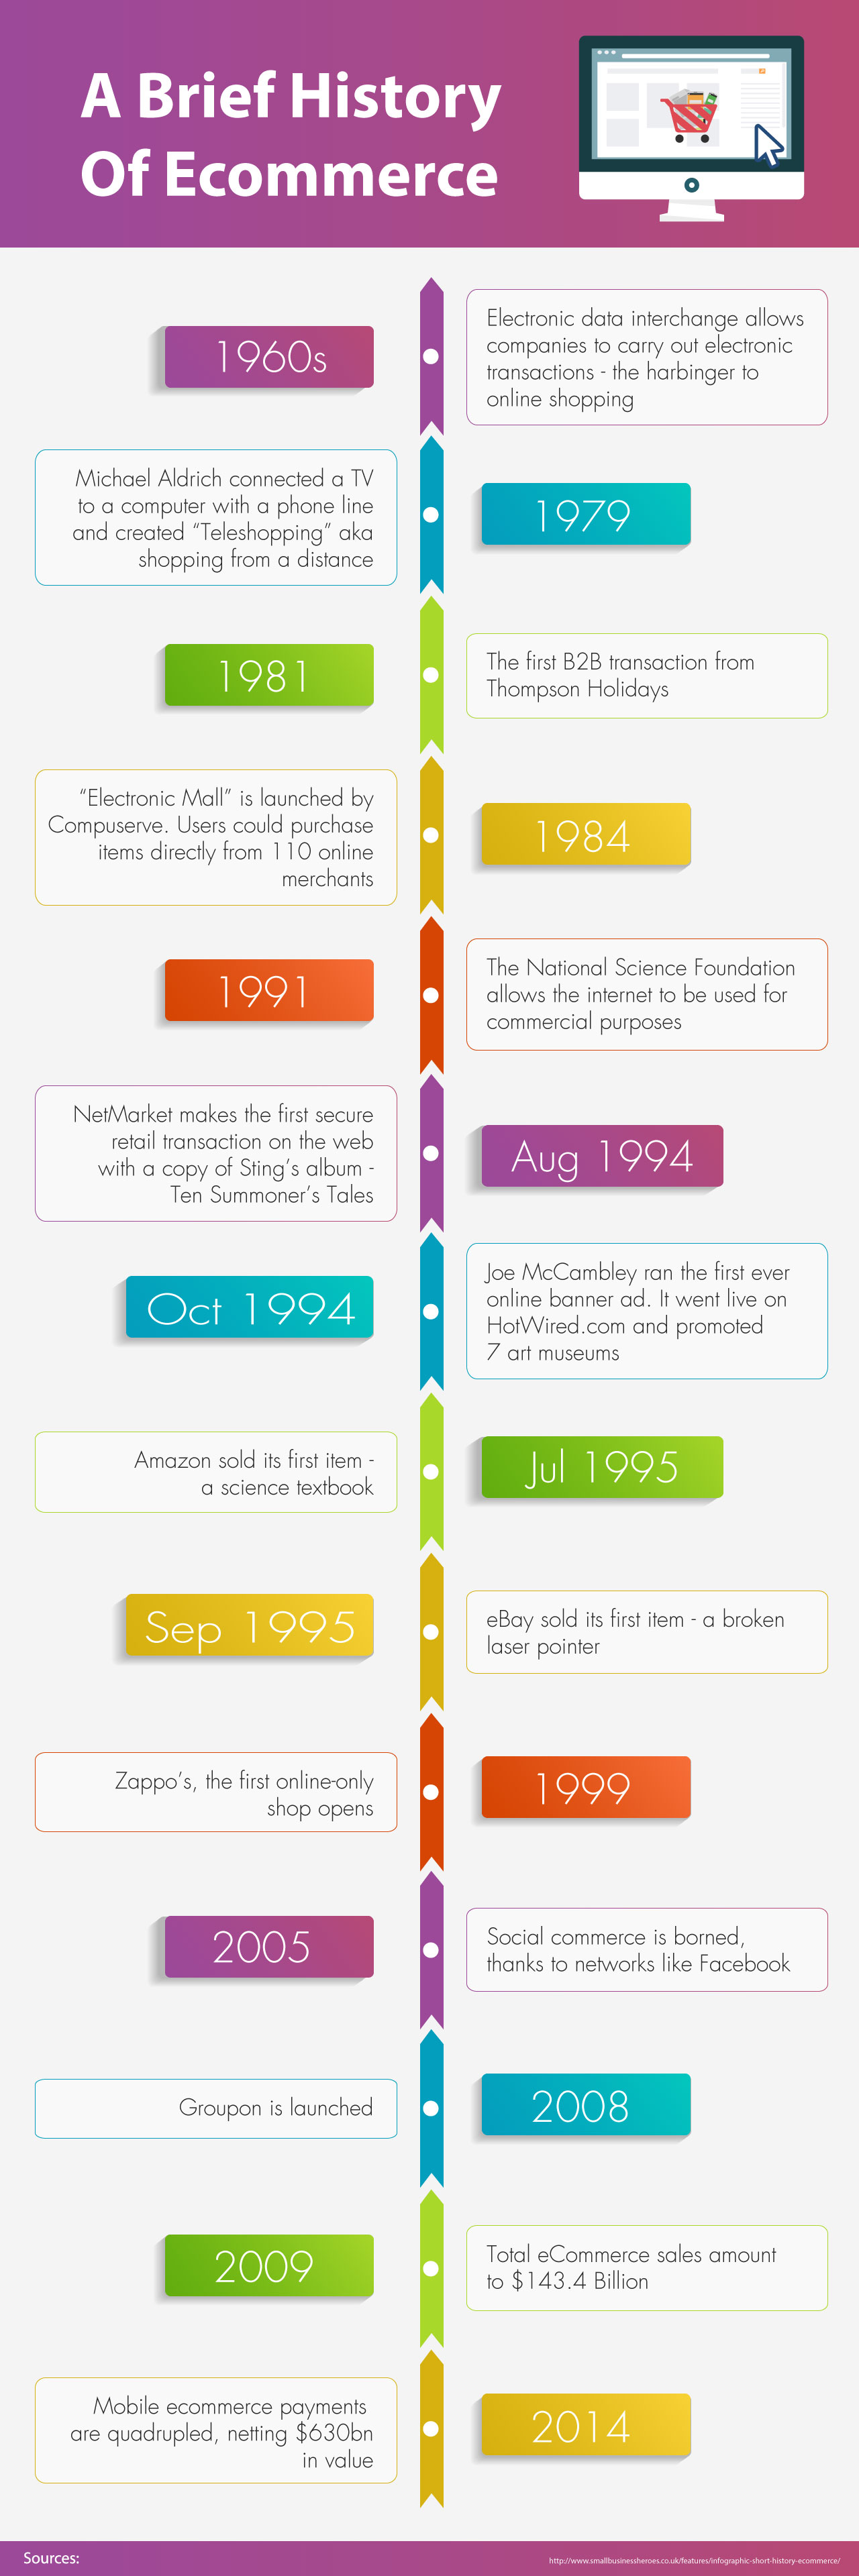 a-brief-history-of-ecommerce